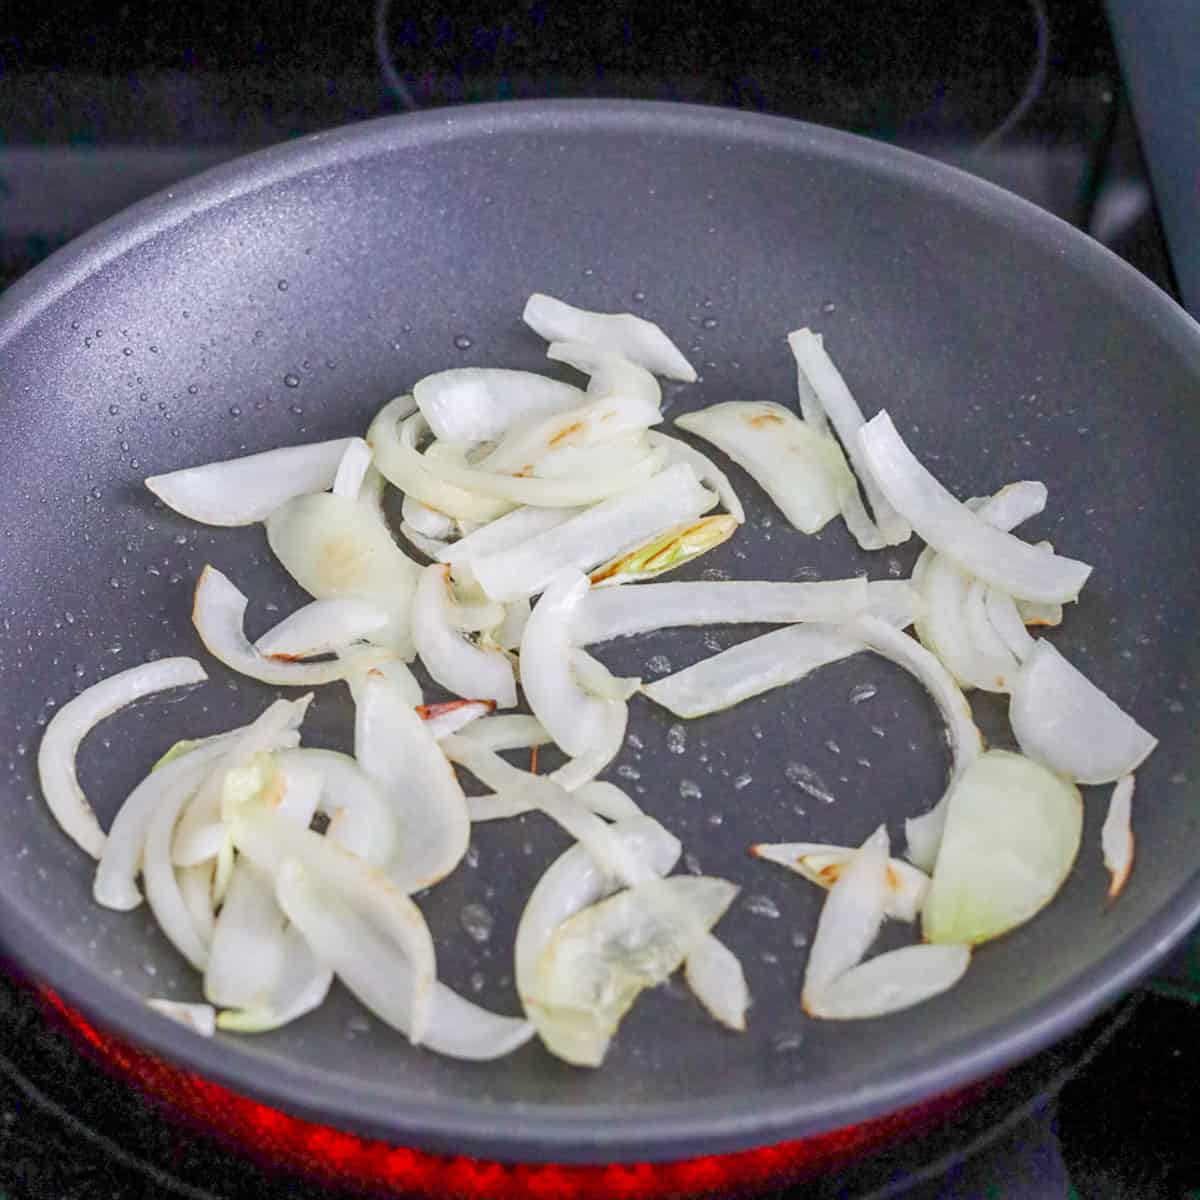 Cook Onions